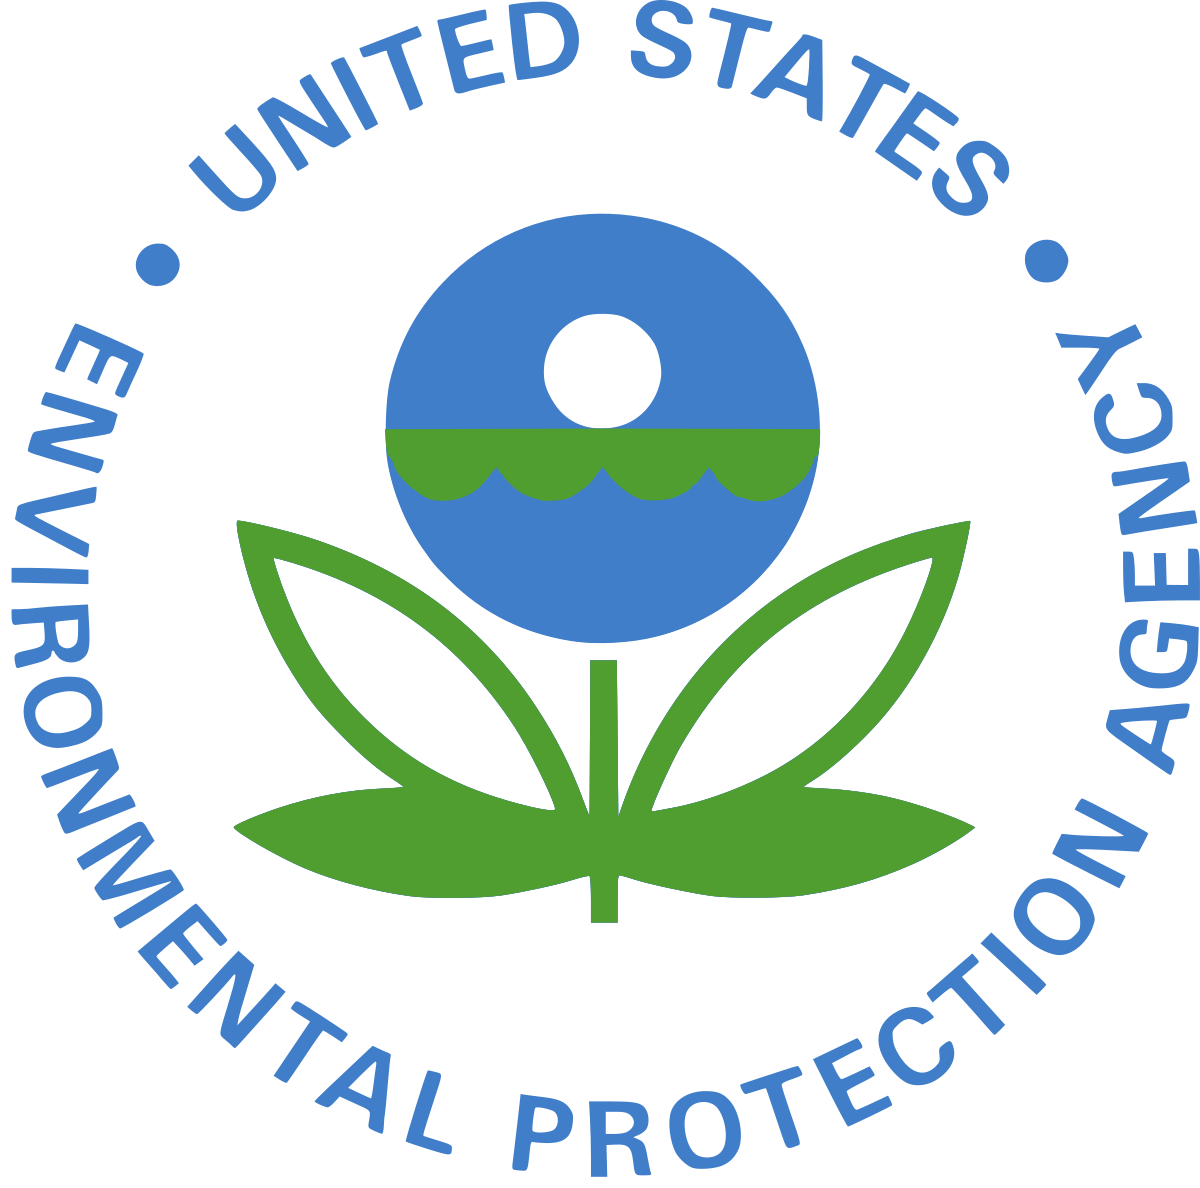 USEPA Submits Proposals Related to UCMR 5 and Disposal of PFAS